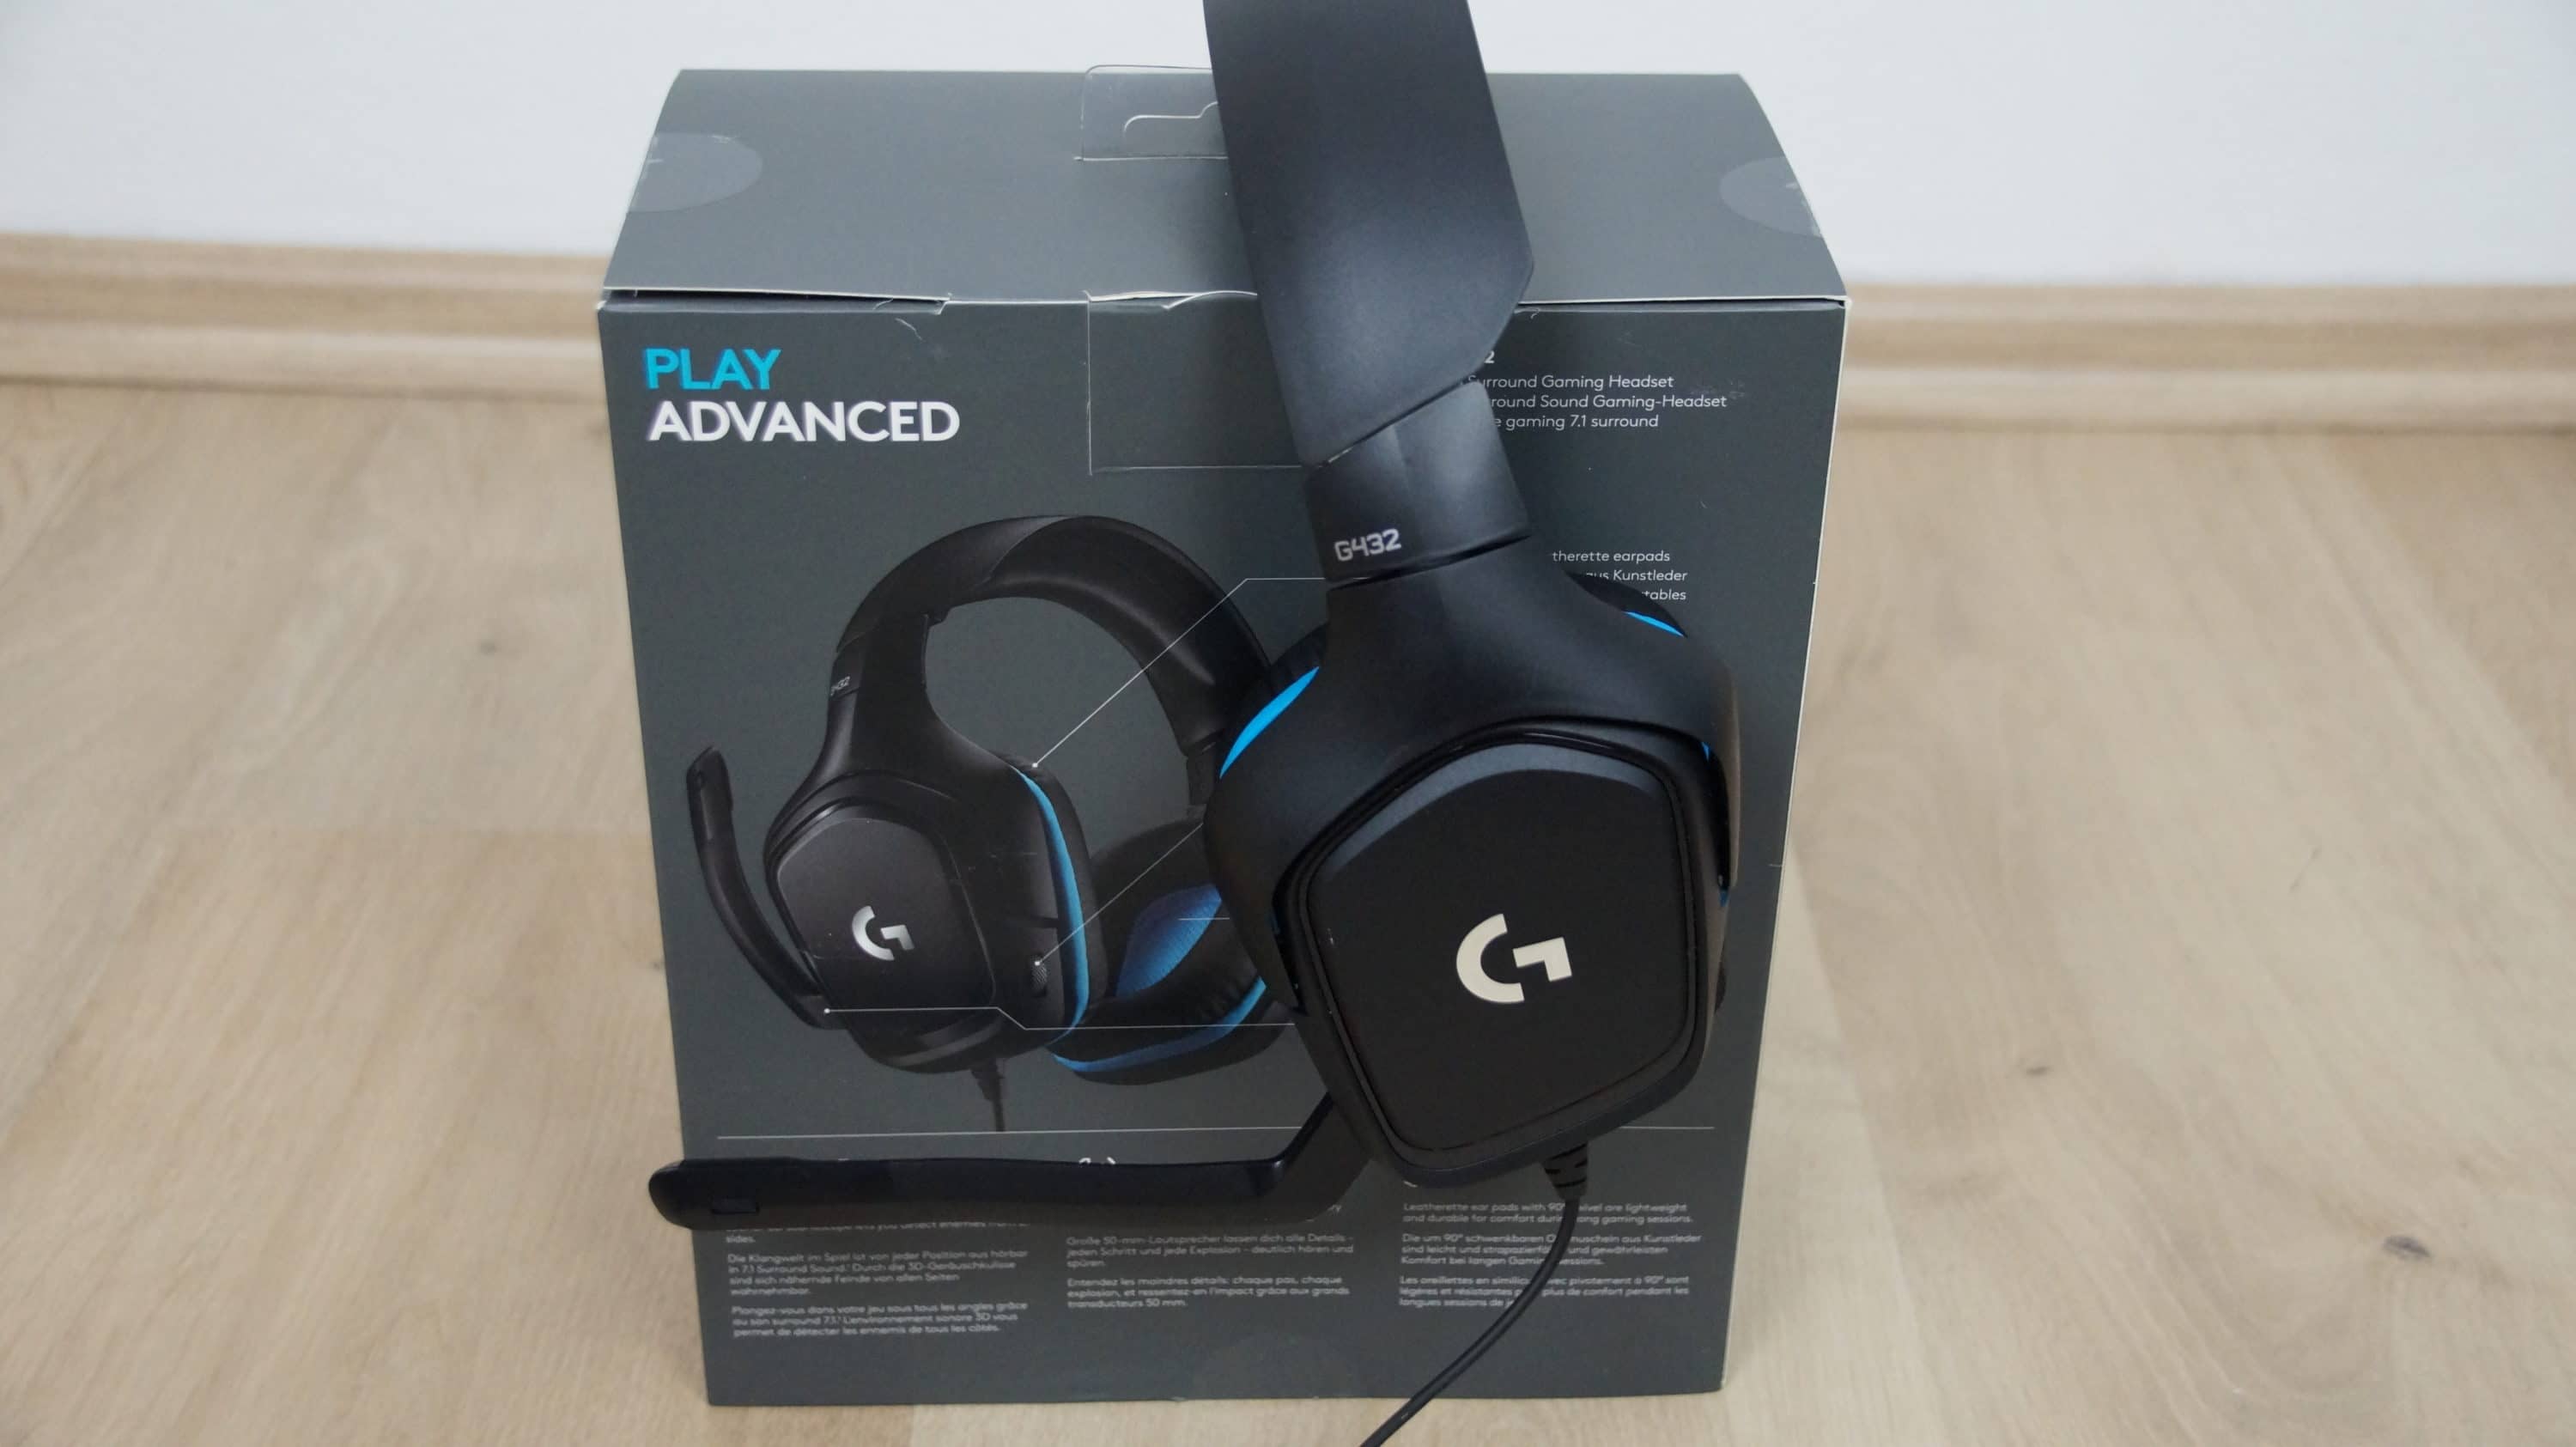 Logitech G432 Review - Good mid-tier headset marred by old design